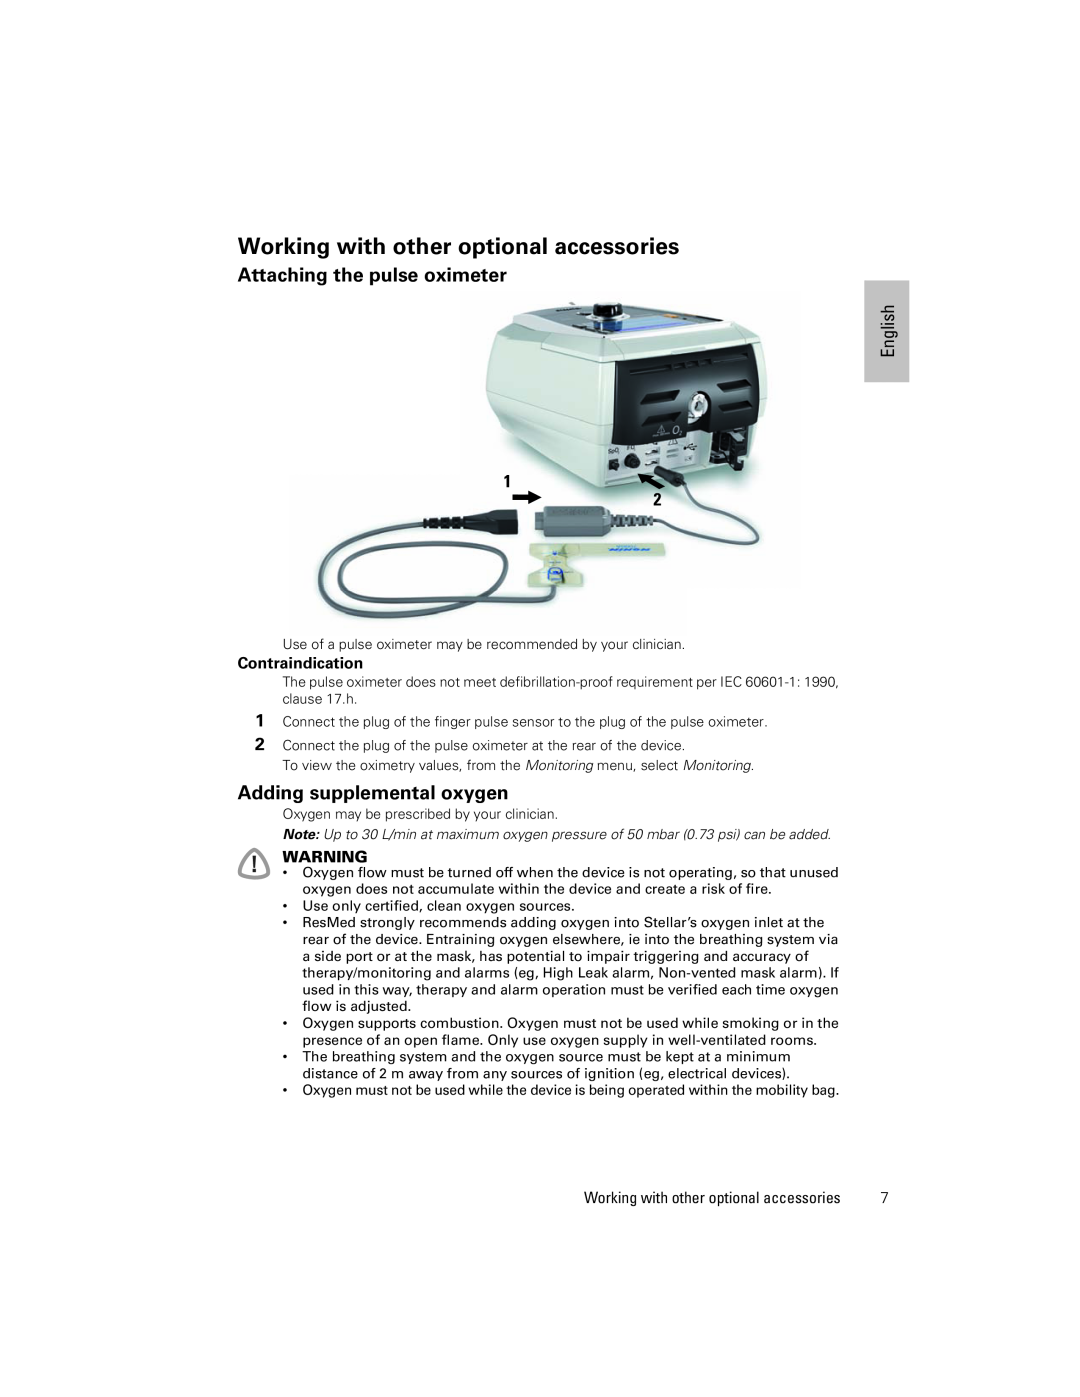 ResMed 248551/1 Working with other optional accessories, Attaching the pulse oximeter, Adding supplemental oxygen, English 